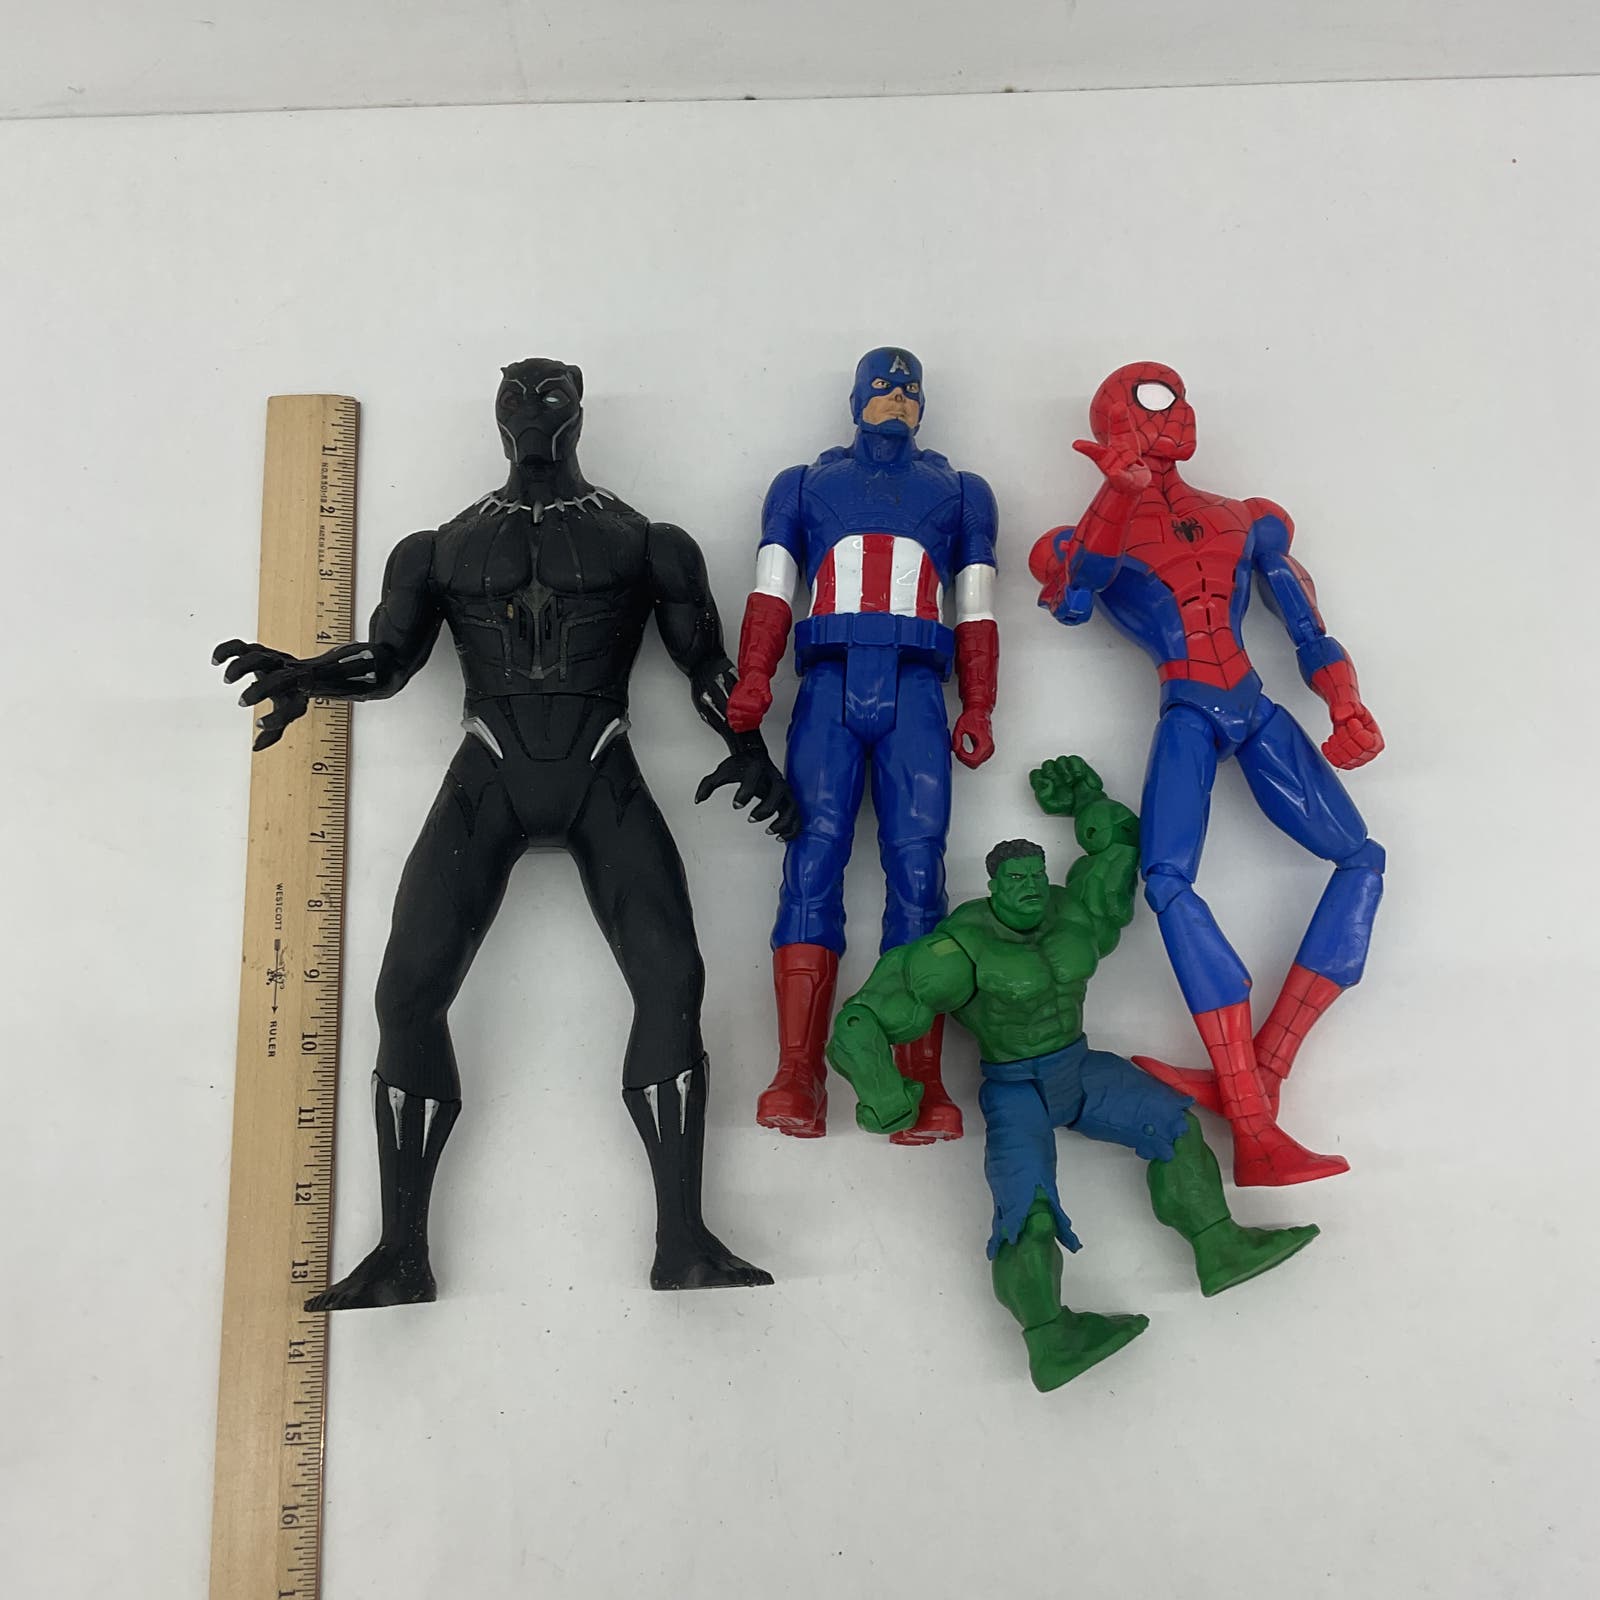 Mixed Marvel Action Figures LOT Avengers Black Panther The Hulk Captain America - Warehouse Toys